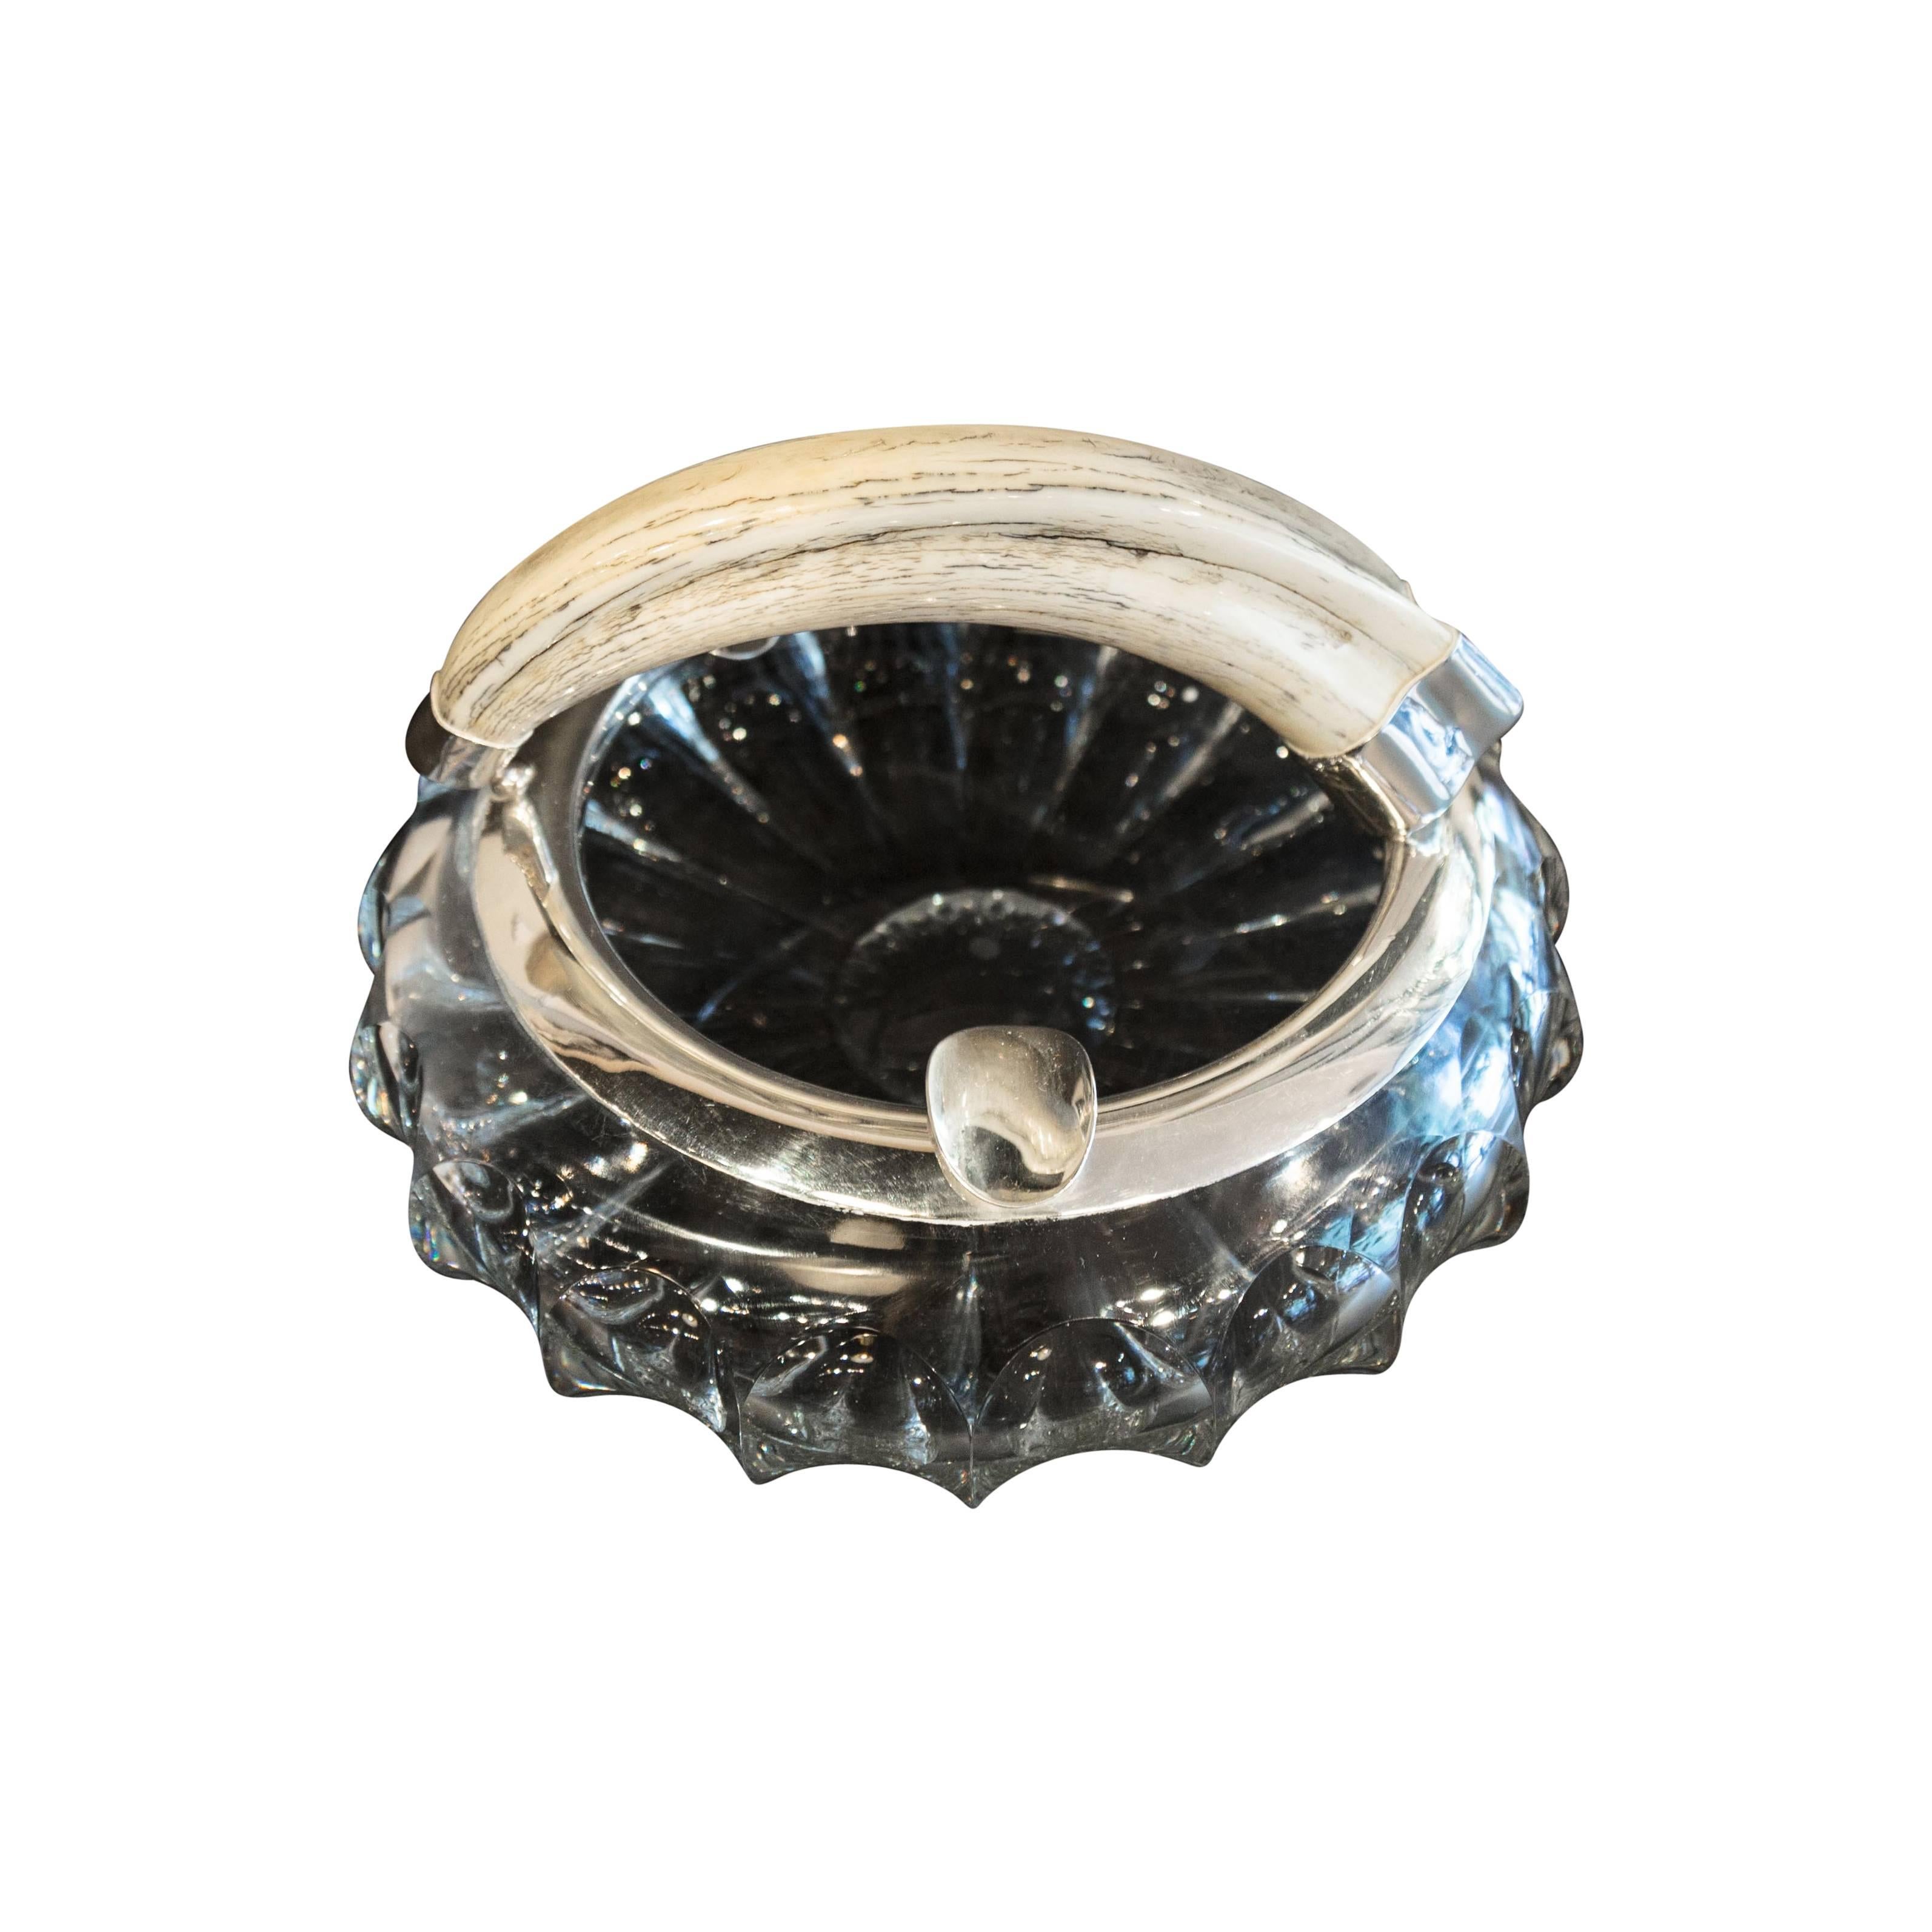 A crystal cut-glass and boar tooth silver rim ash tray, circa 1920. The sterling silver has its certified stamp. A brilliant edition to any bar, office, or lounge.